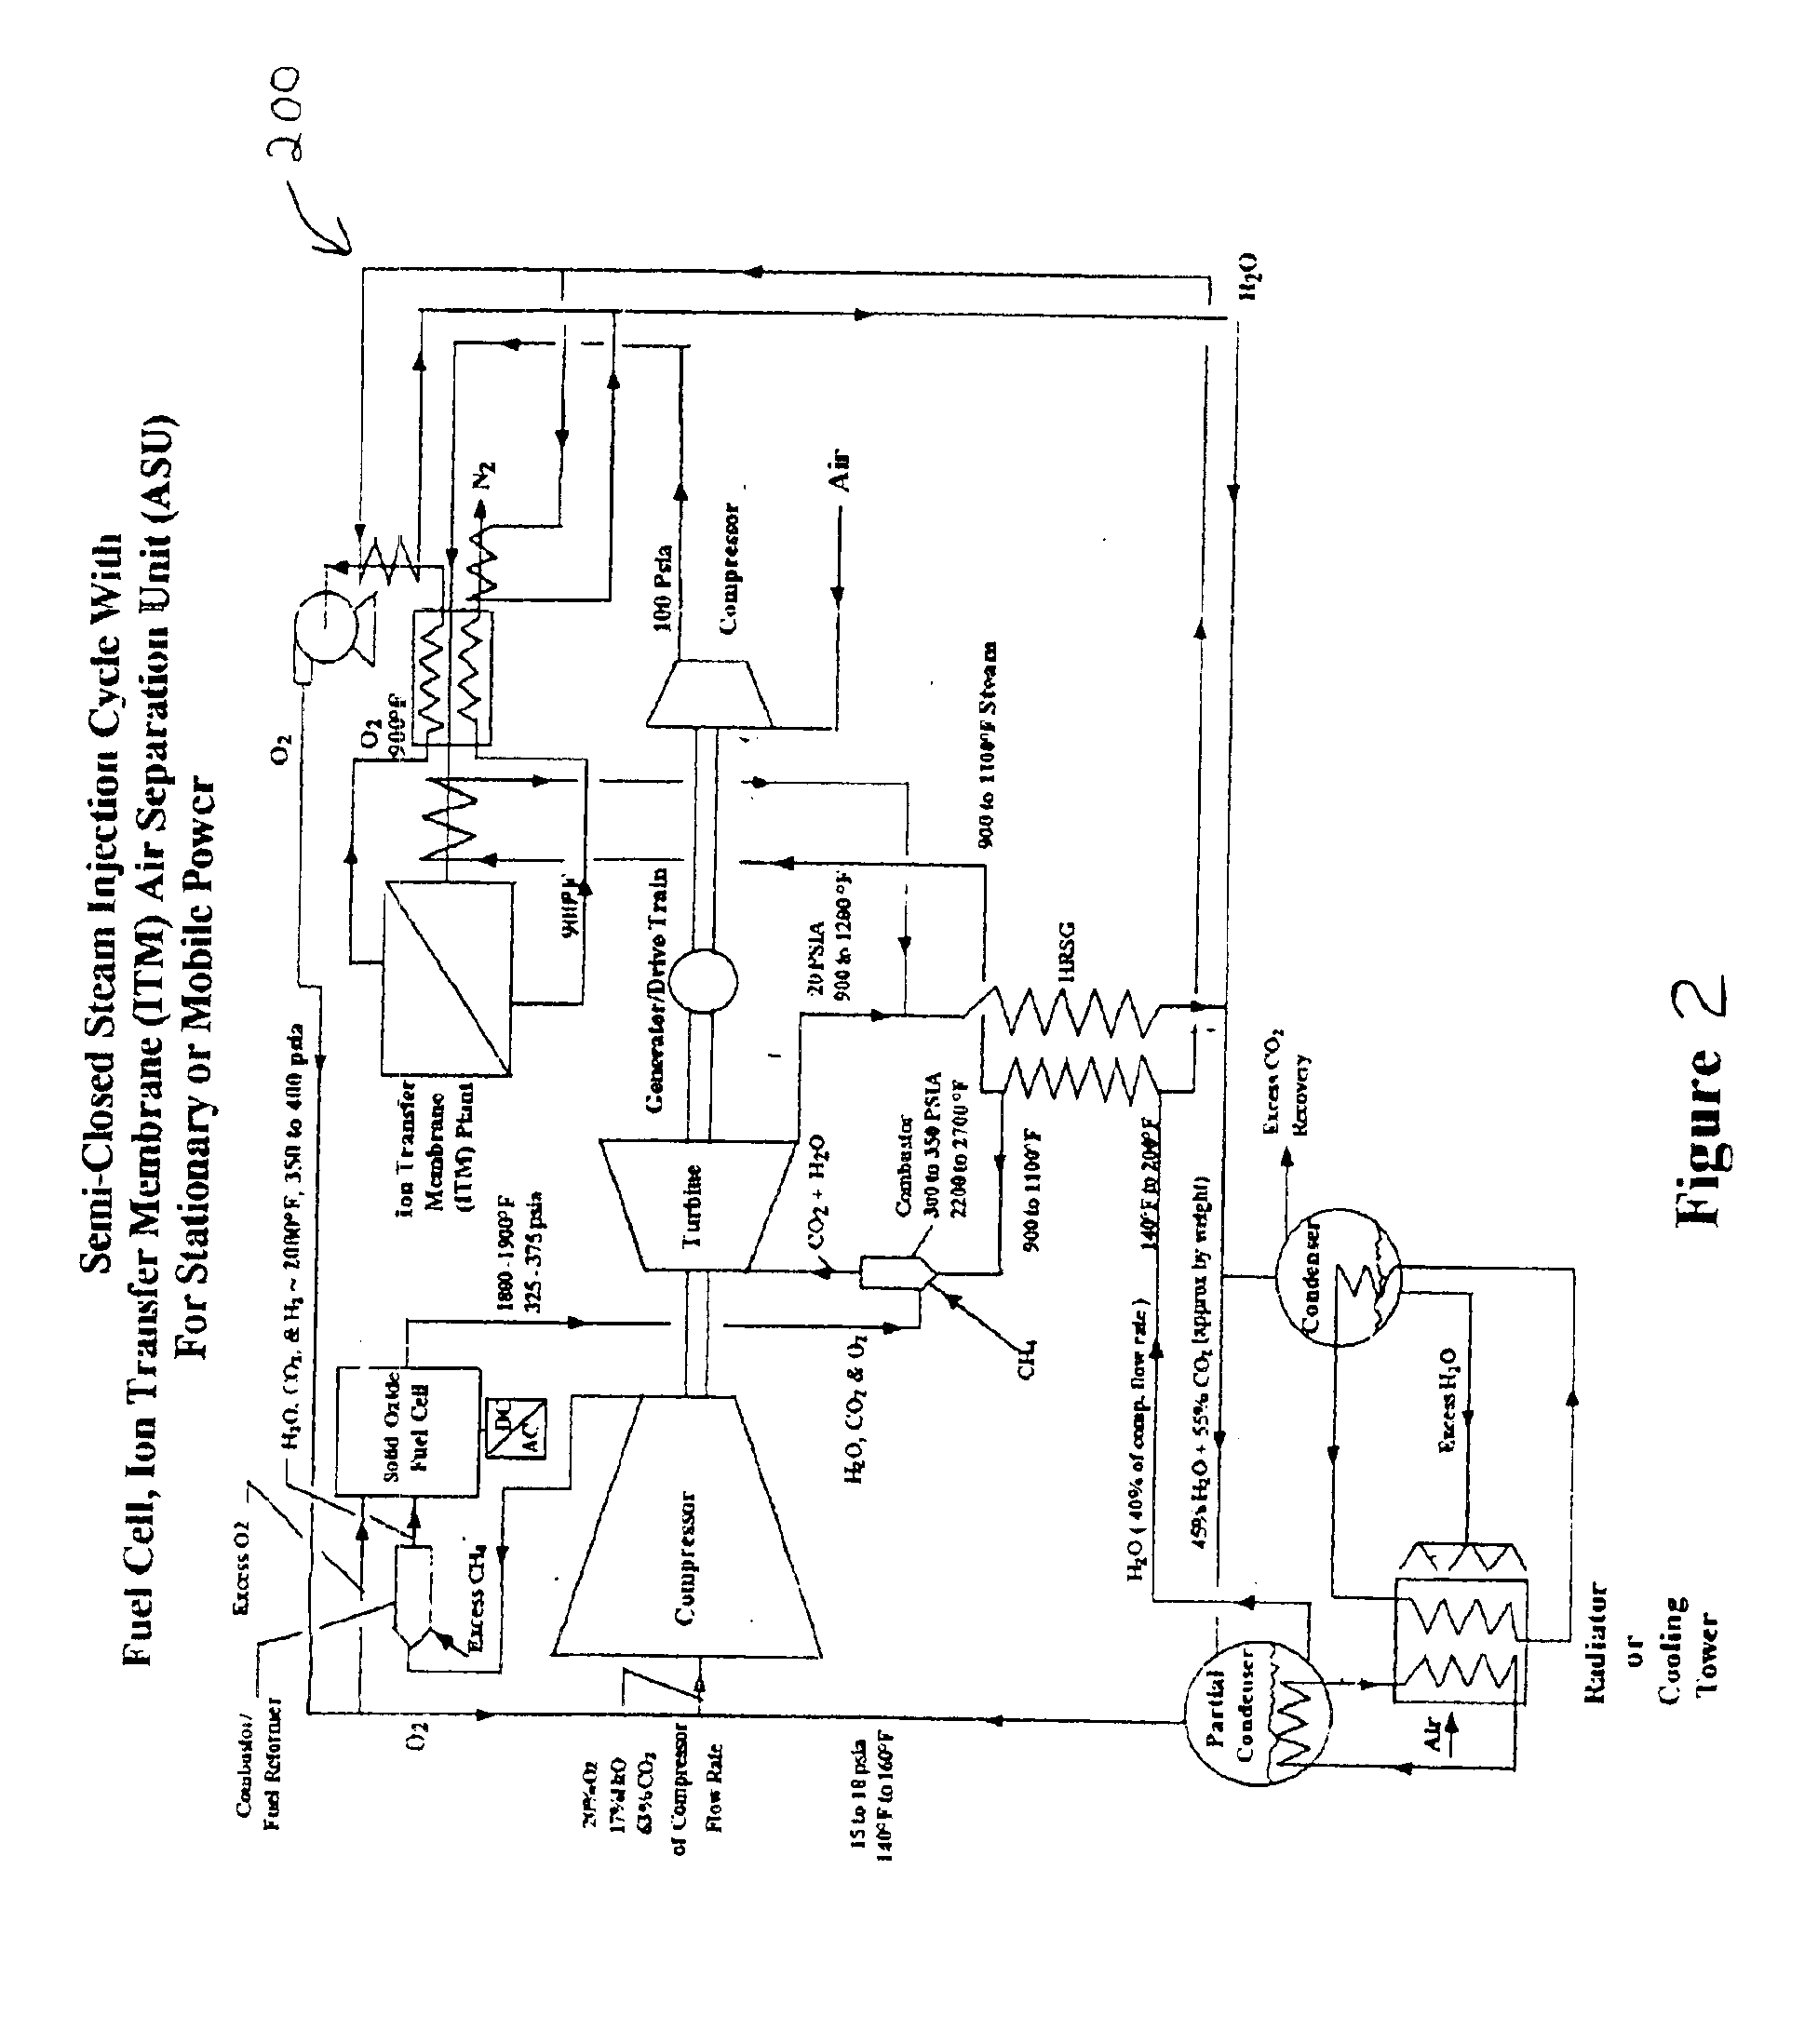 Combined fuel cell and fuel combustion power generation systems